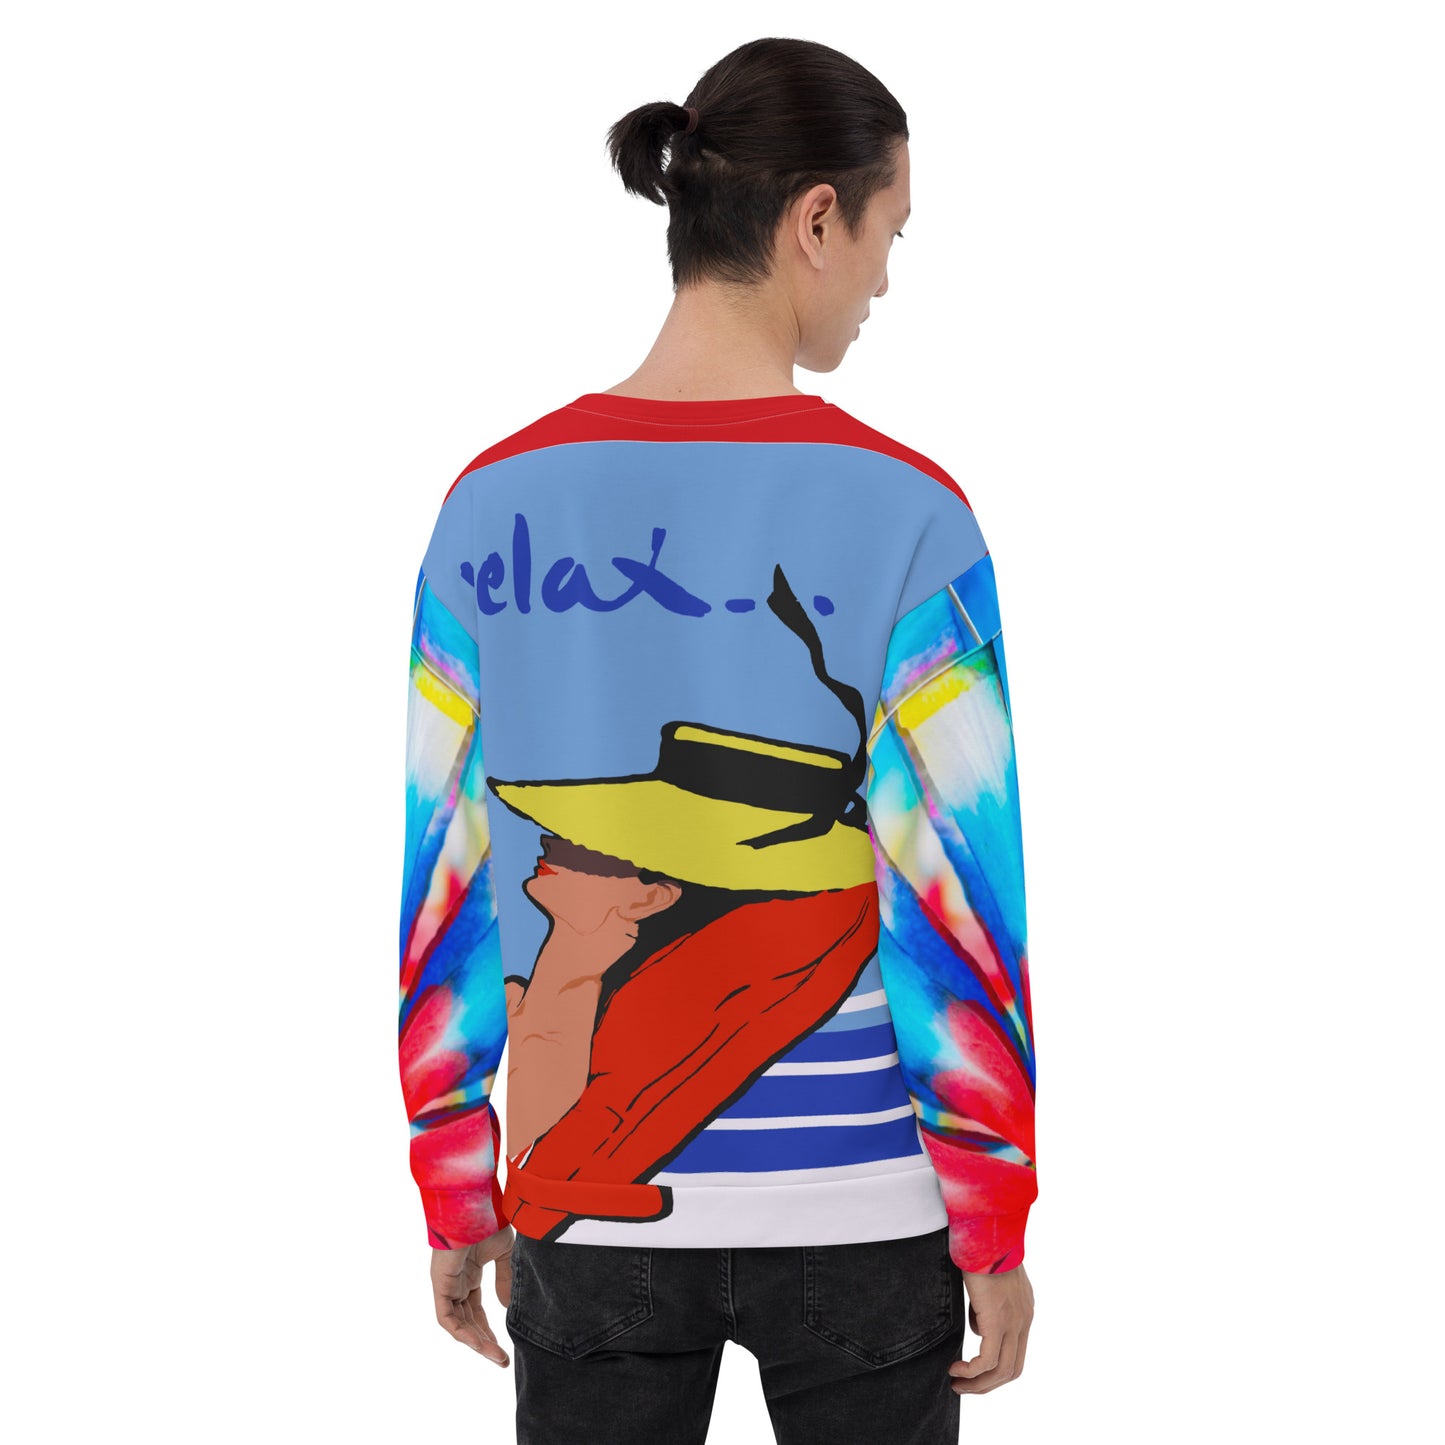 Relax Go To IT! Vacation-Themed Unisex Sweatshirt